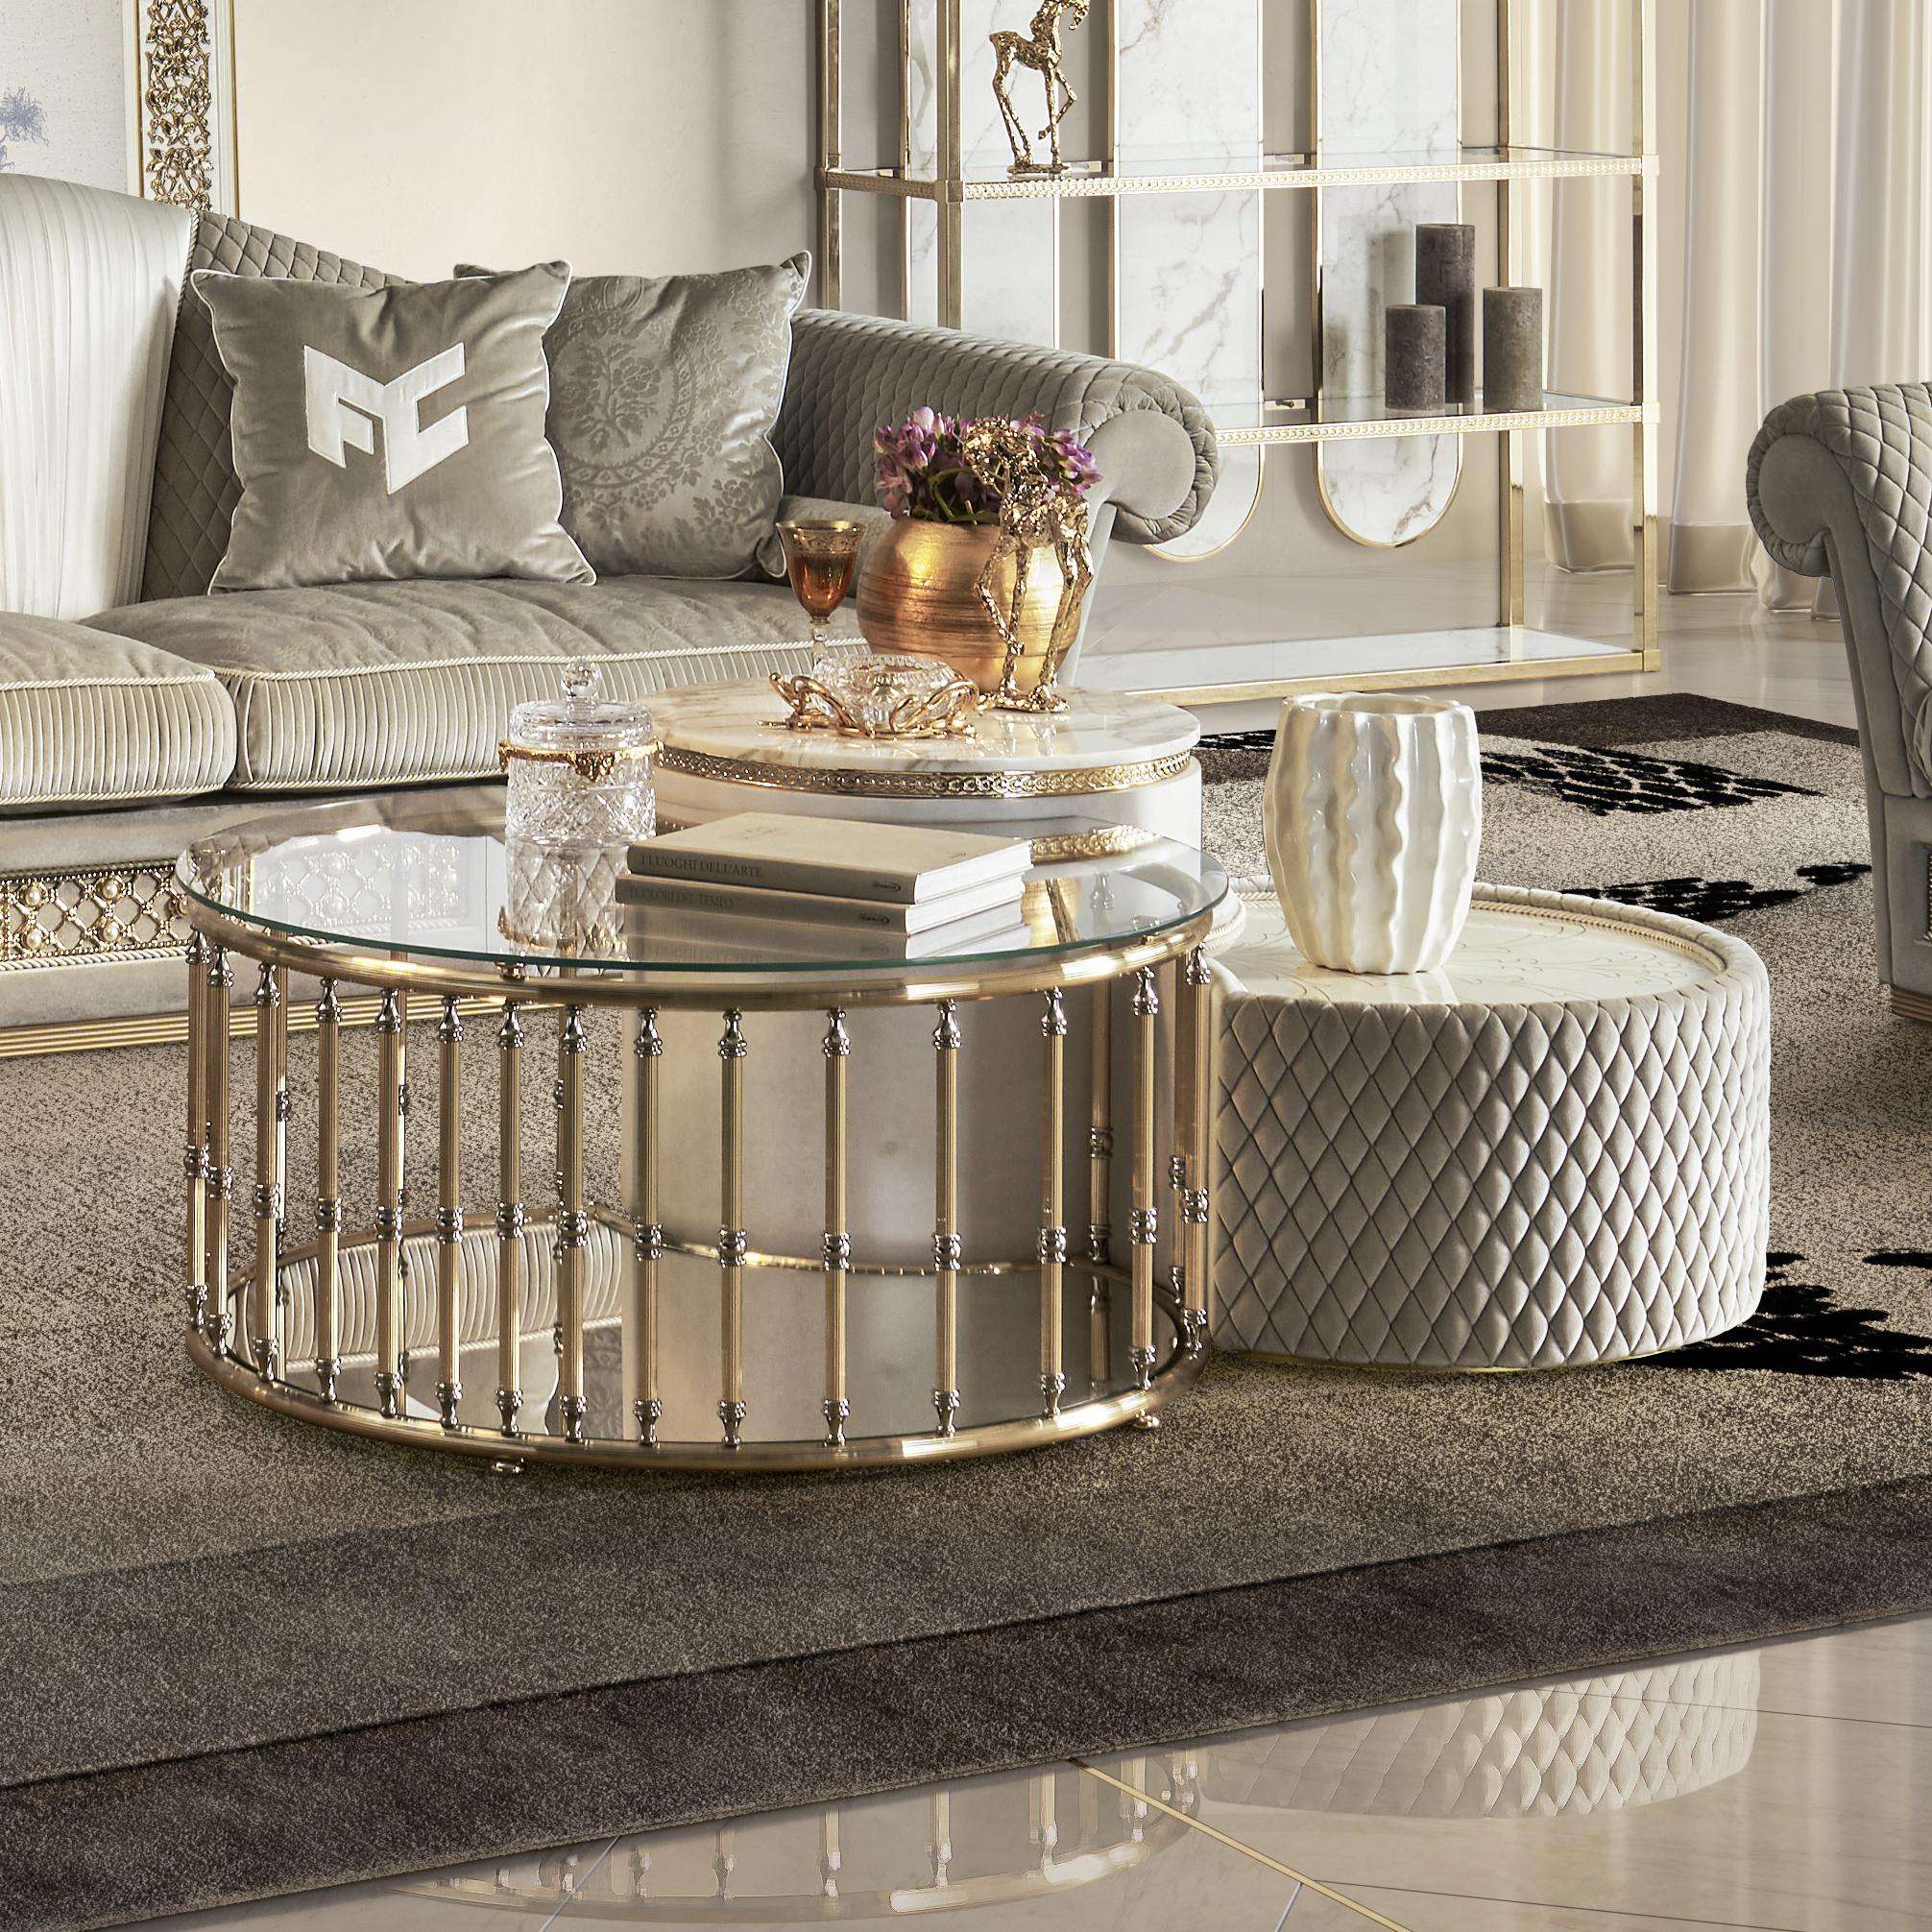 The tables in the EL074 tris can be positioned as self-standing pieces or aggregated, creating a striking composition.

What stands out in this article is the amount of materials and workmanship used:
-the main table consists of a 24-karat